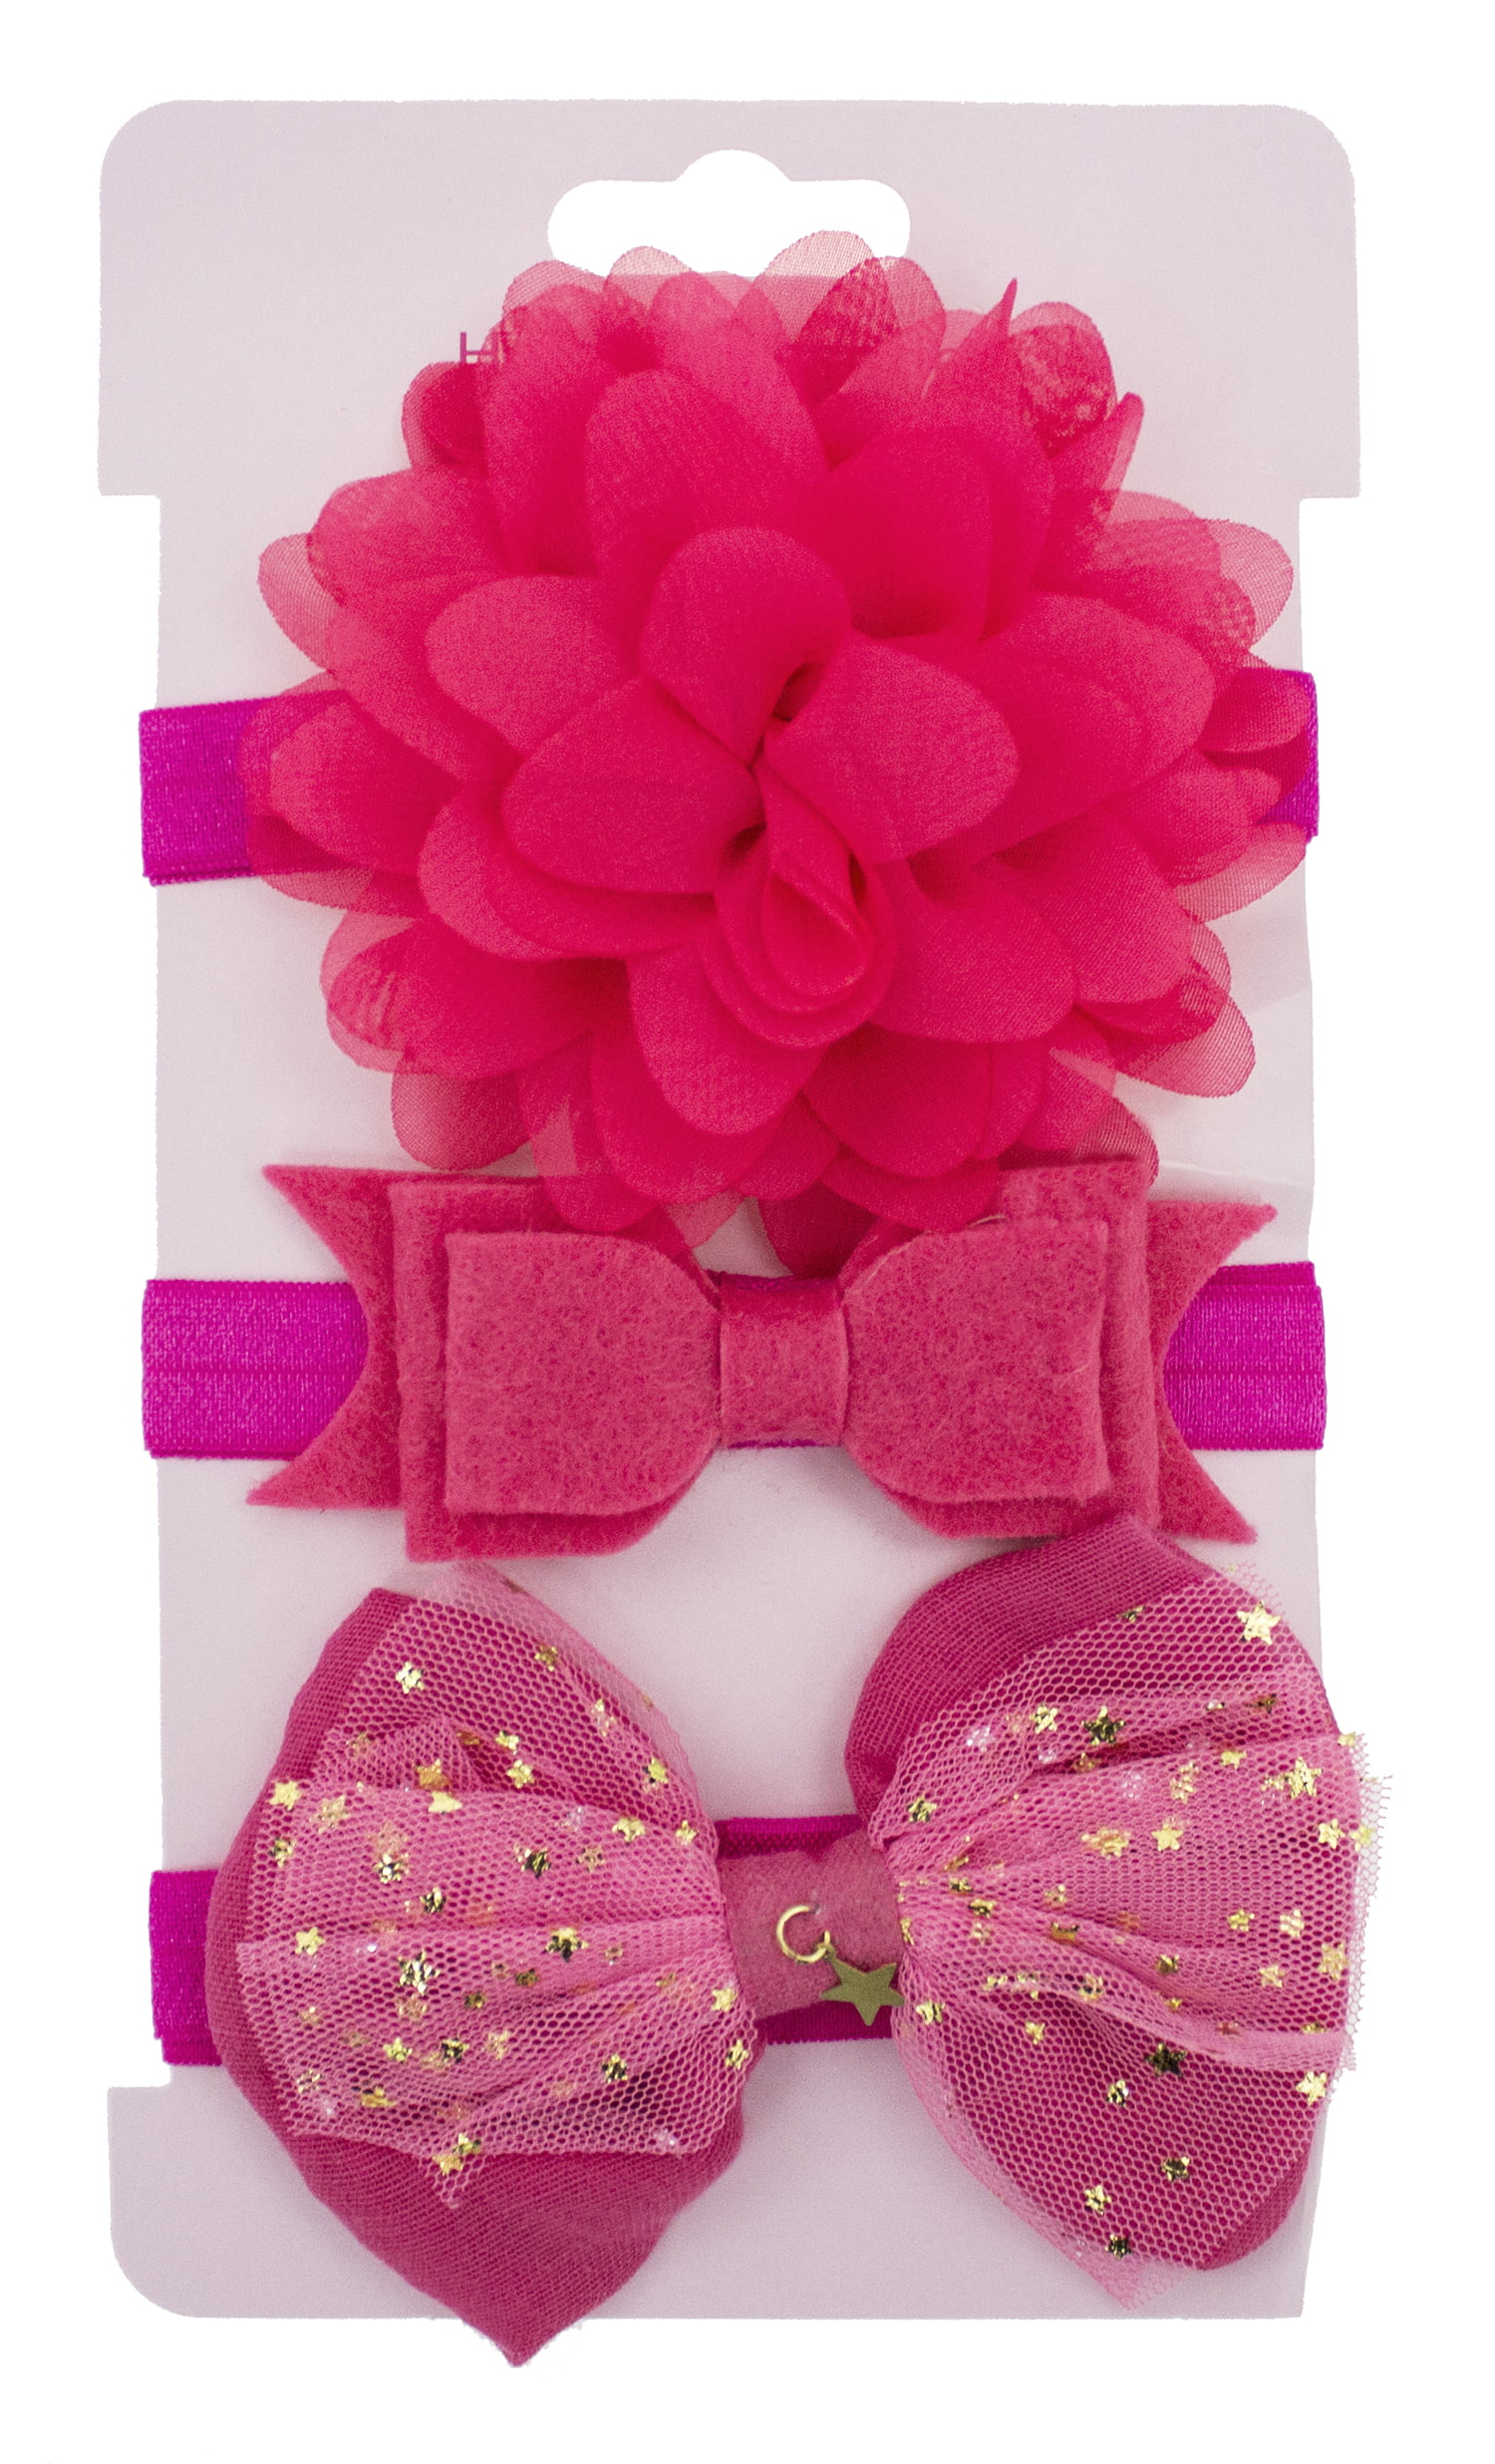 NEW GYMBOREE Baby Girl Hair Bow Pink Flower Clip SHOWERS of FLOWERS NWT 